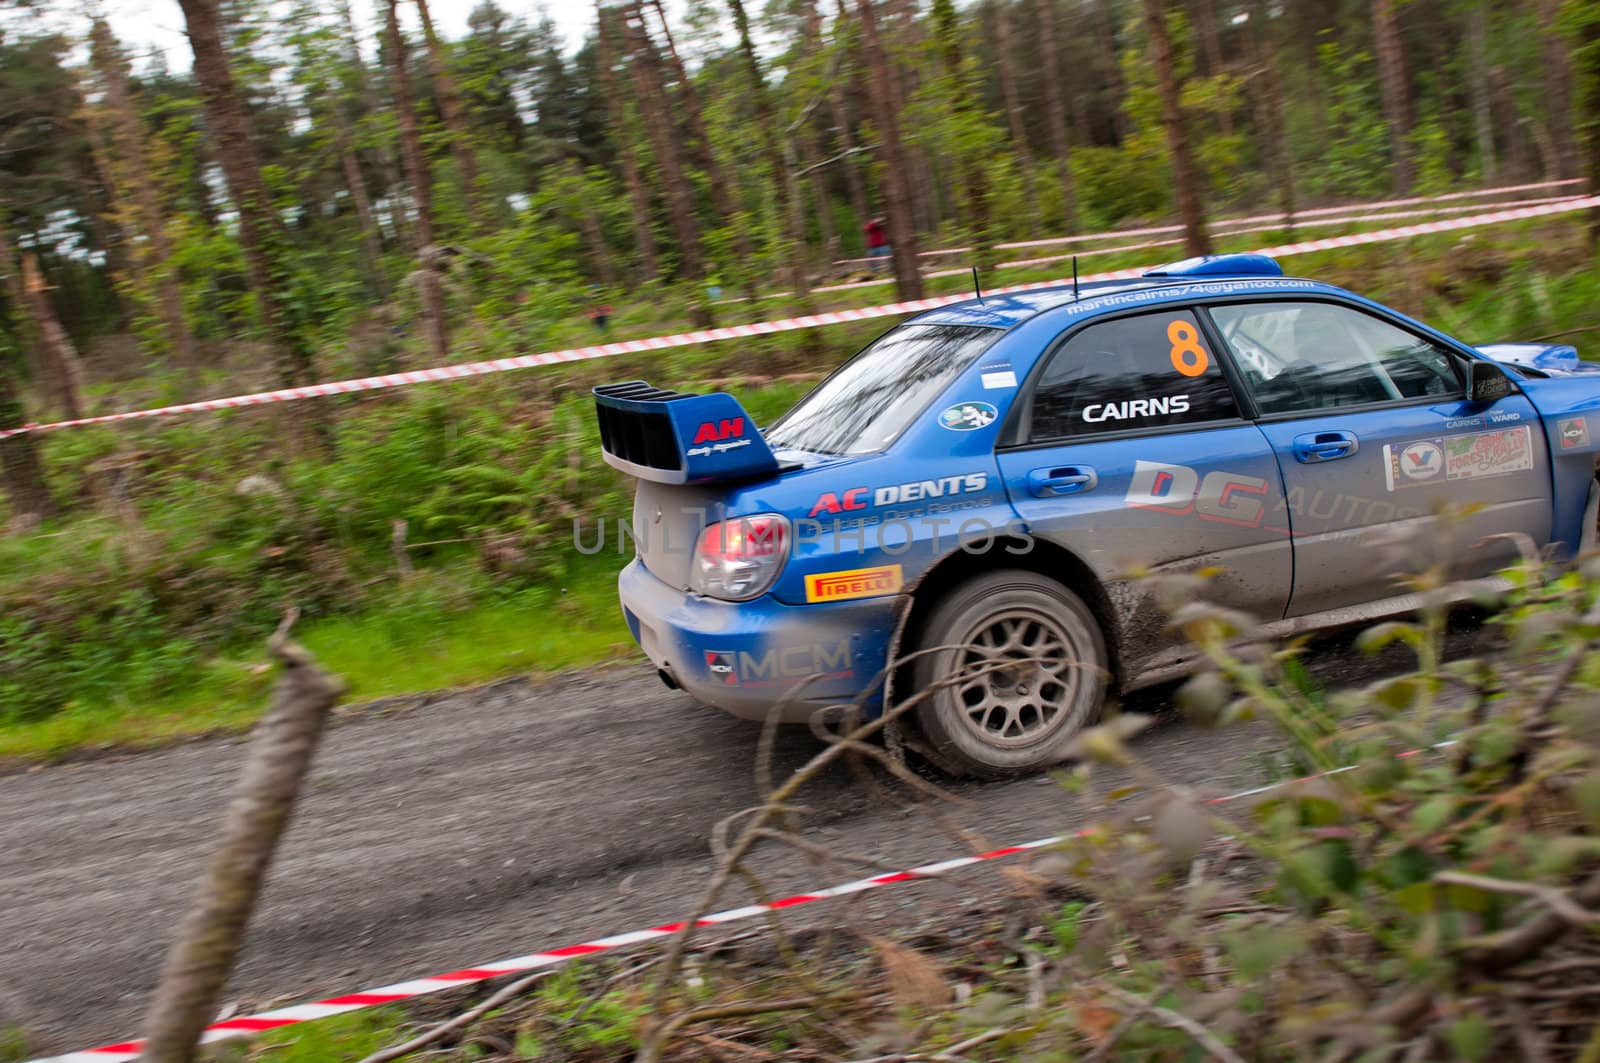 MALLOW, IRELAND - MAY 19: M. Cairns driving Subaru Impreza at the Jim Walsh Cork Forest Rally on May 19, 2012 in Mallow, Ireland. 4th round of the Valvoline National Forest Rally Championship.